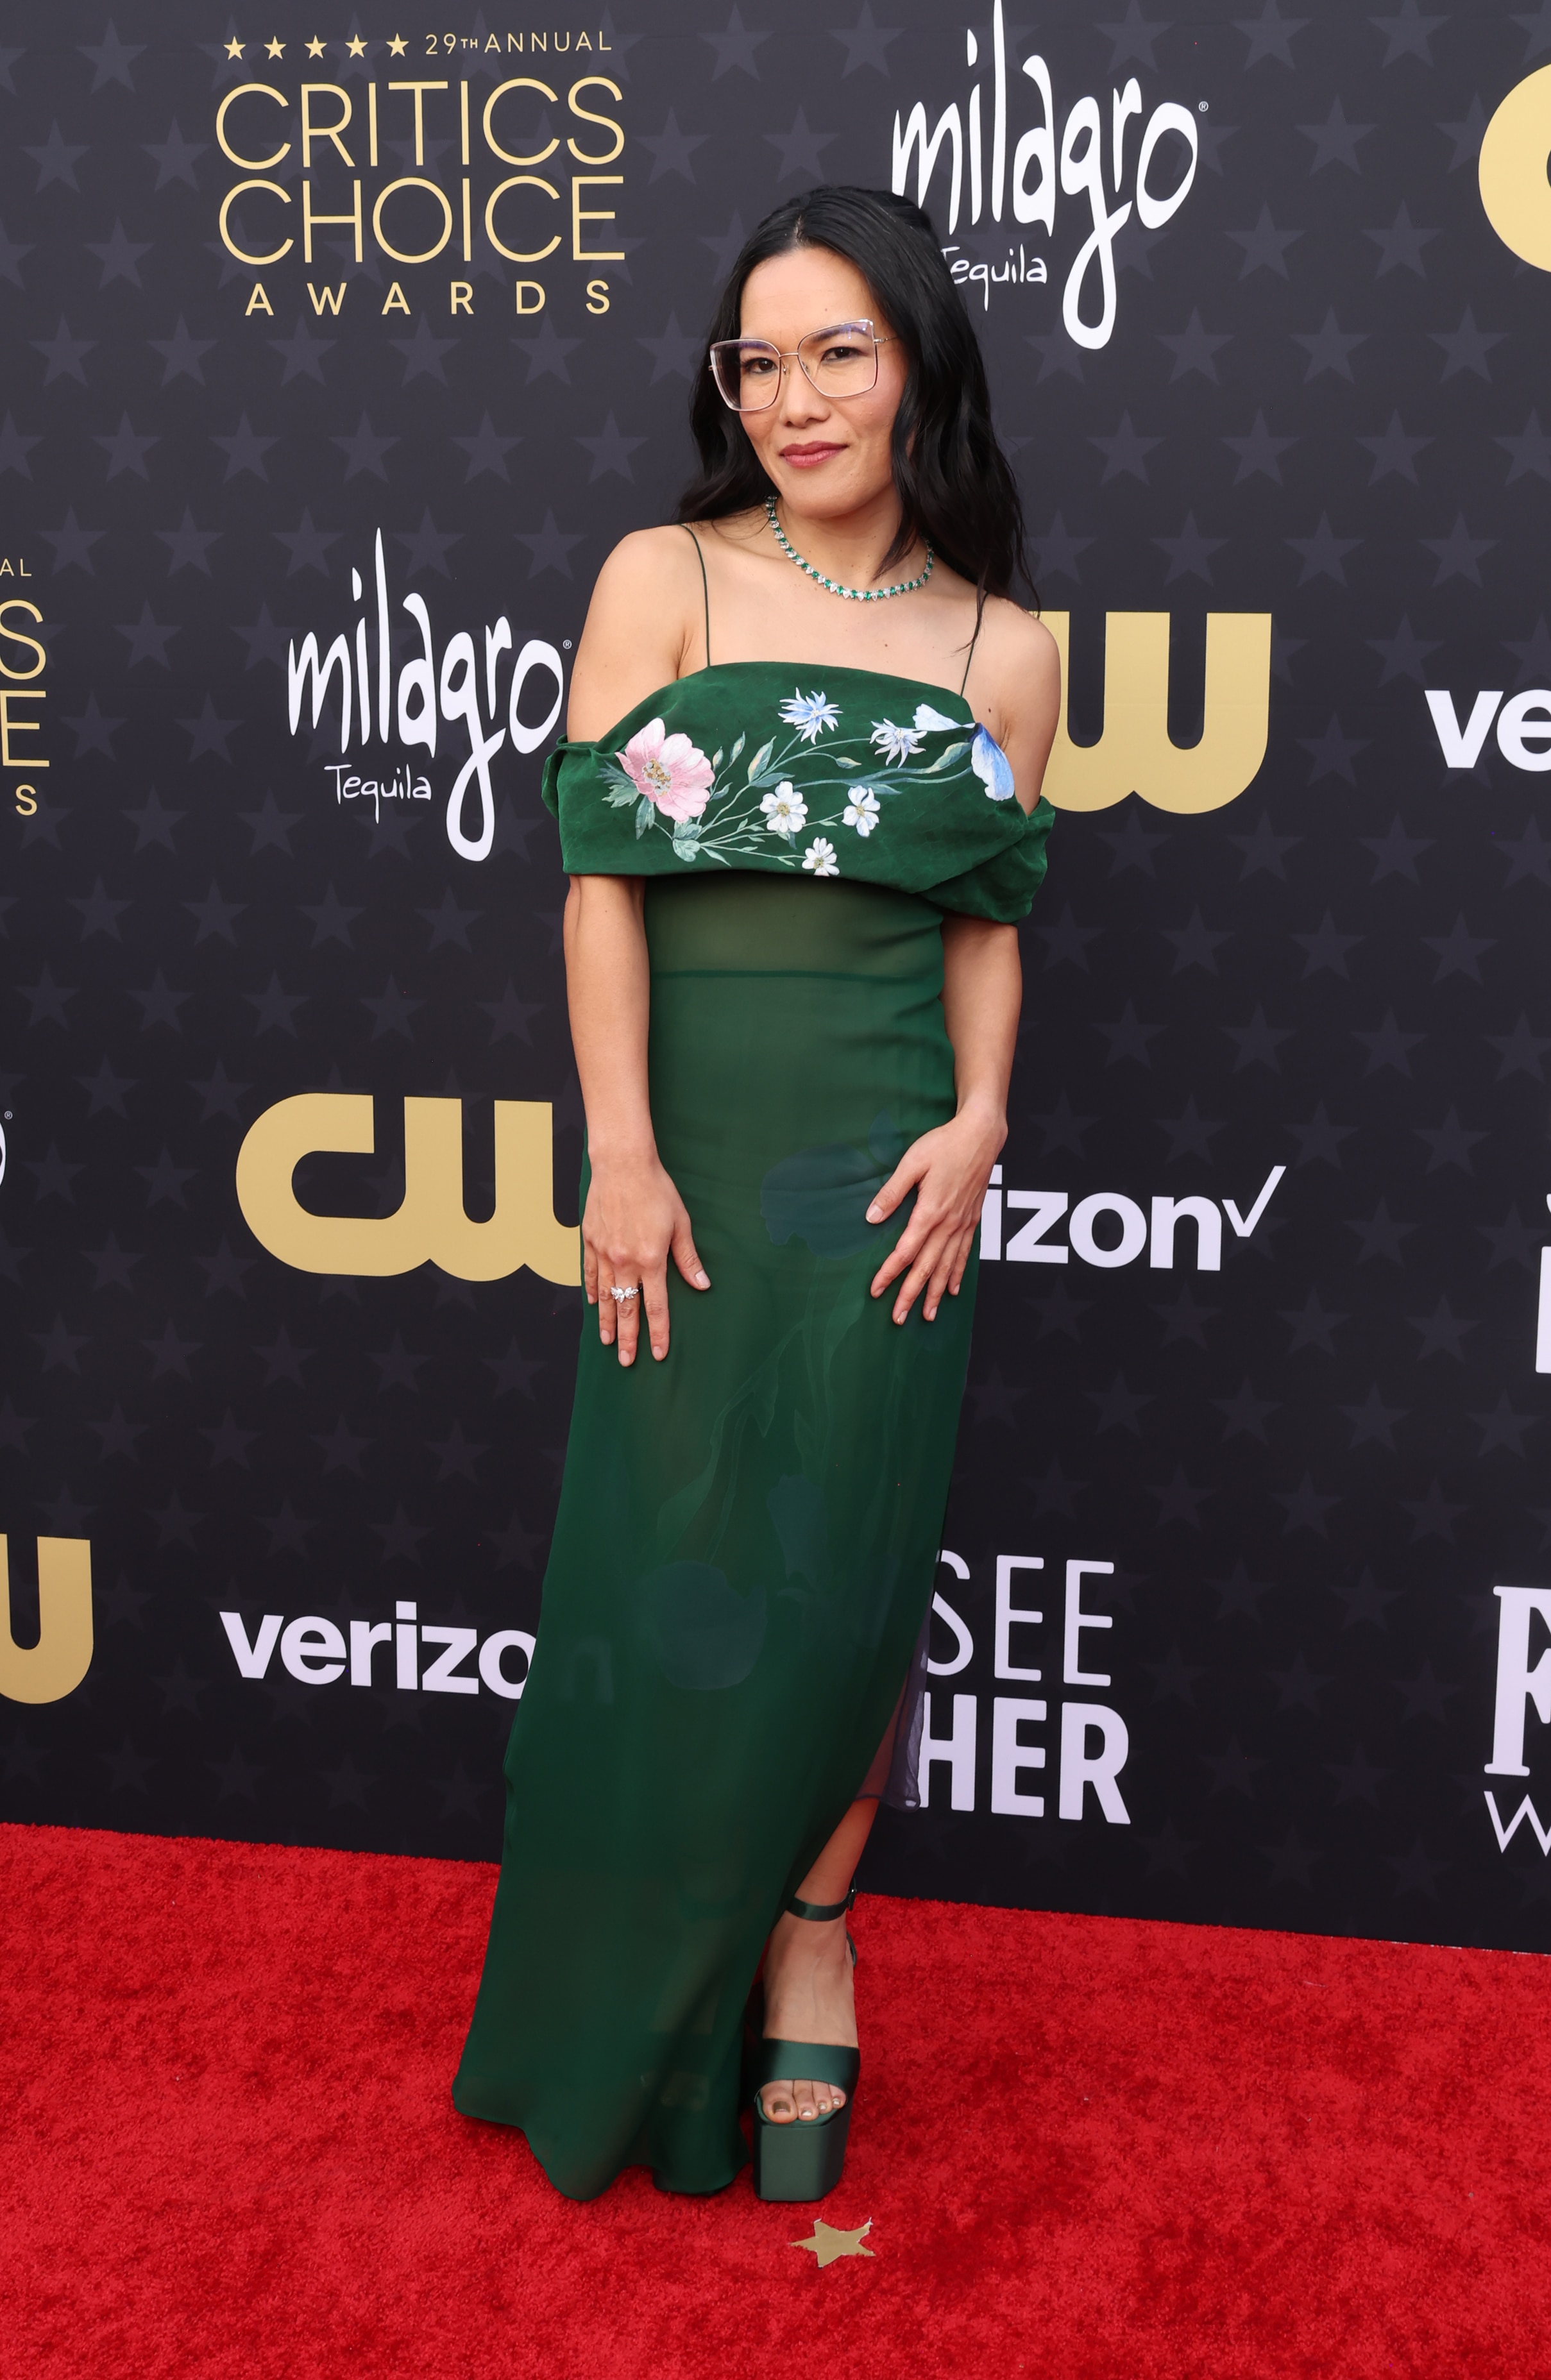 Ali Wong wearing a bottle green strappy dress with floral detailing and big platform shoes